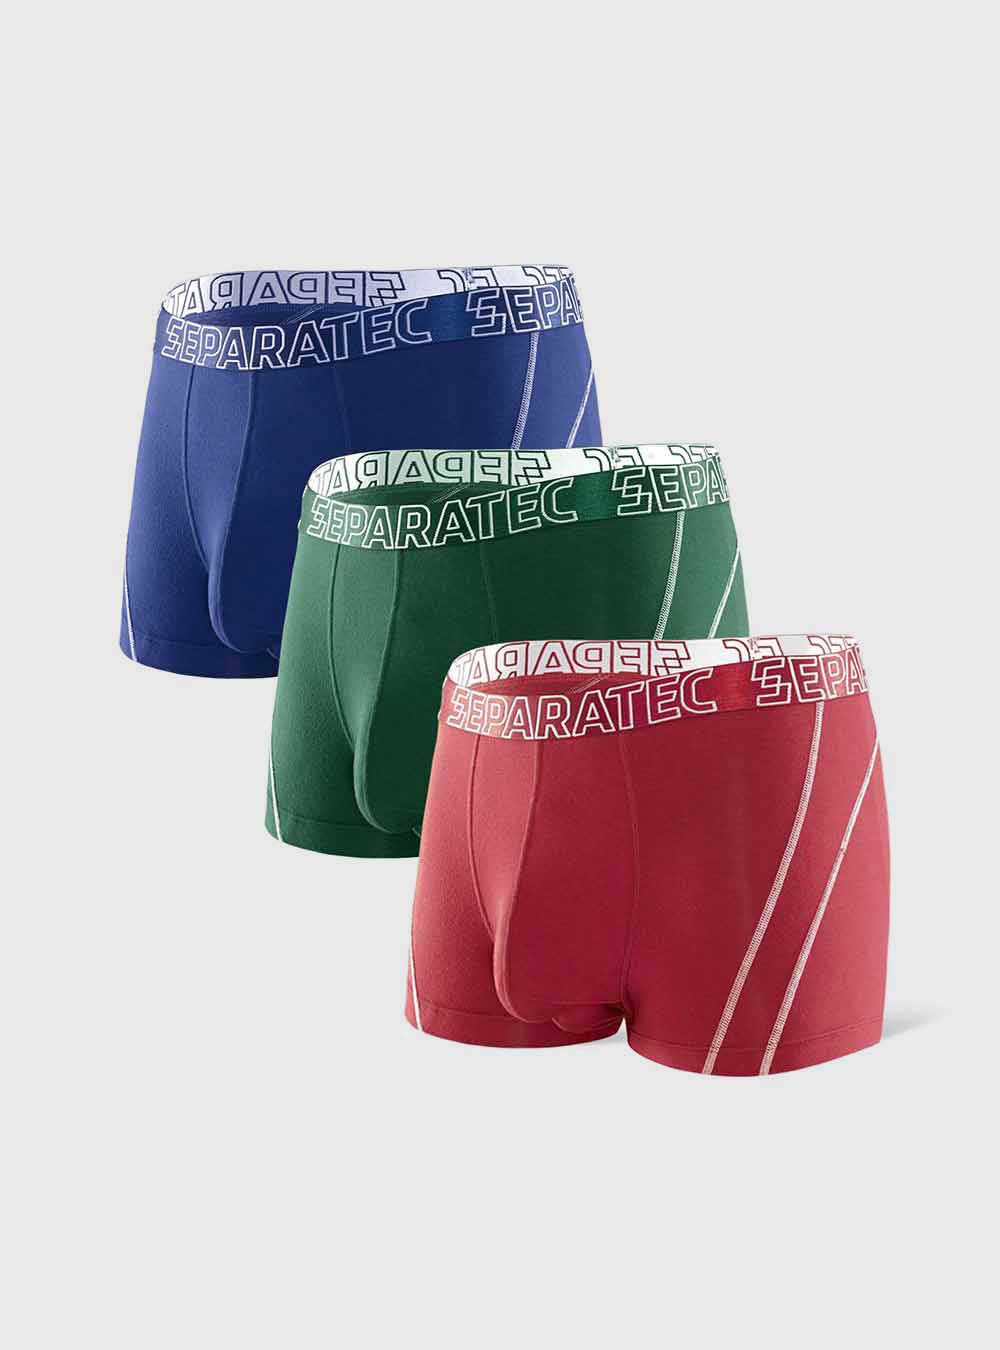 Separatec Dual Pouch Men's Natural Healthy Bamboo Fiber Trunks